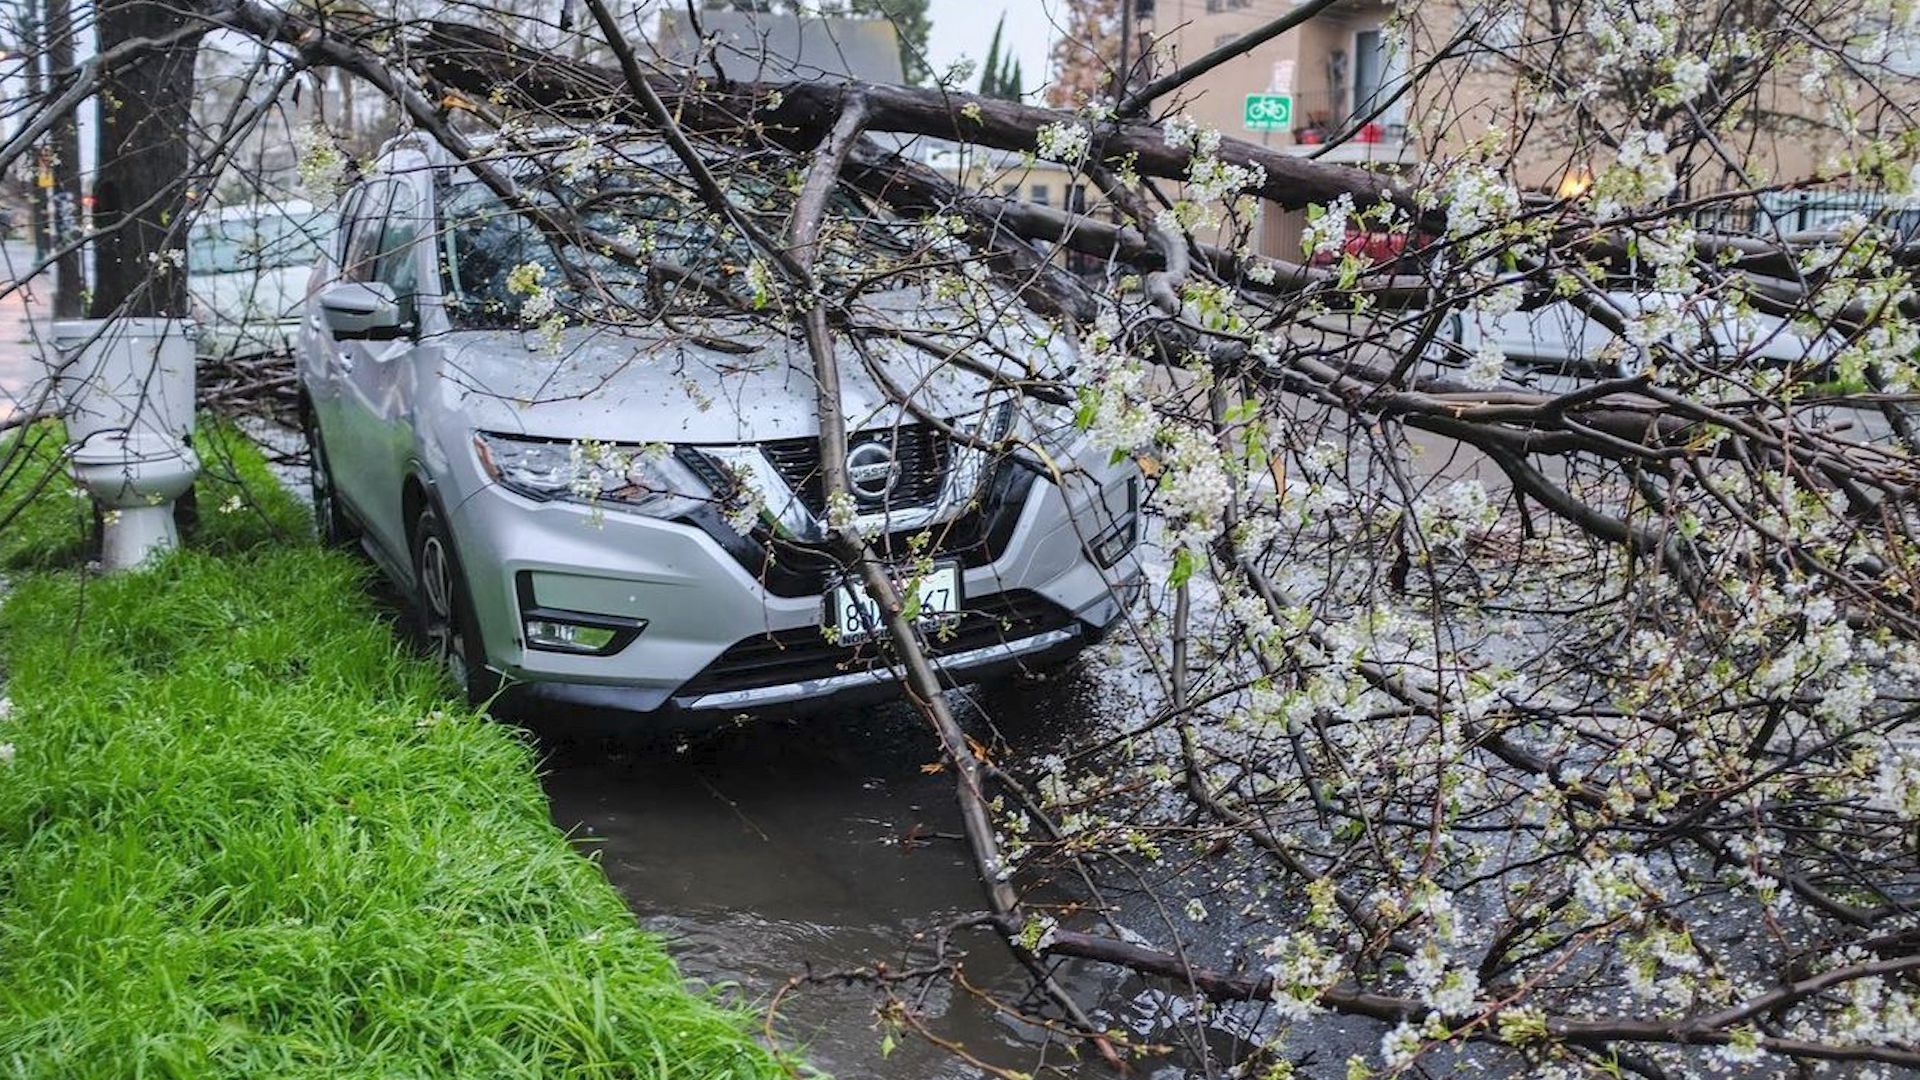 Watch: Dramatic Scenes From California’s Latest Storm